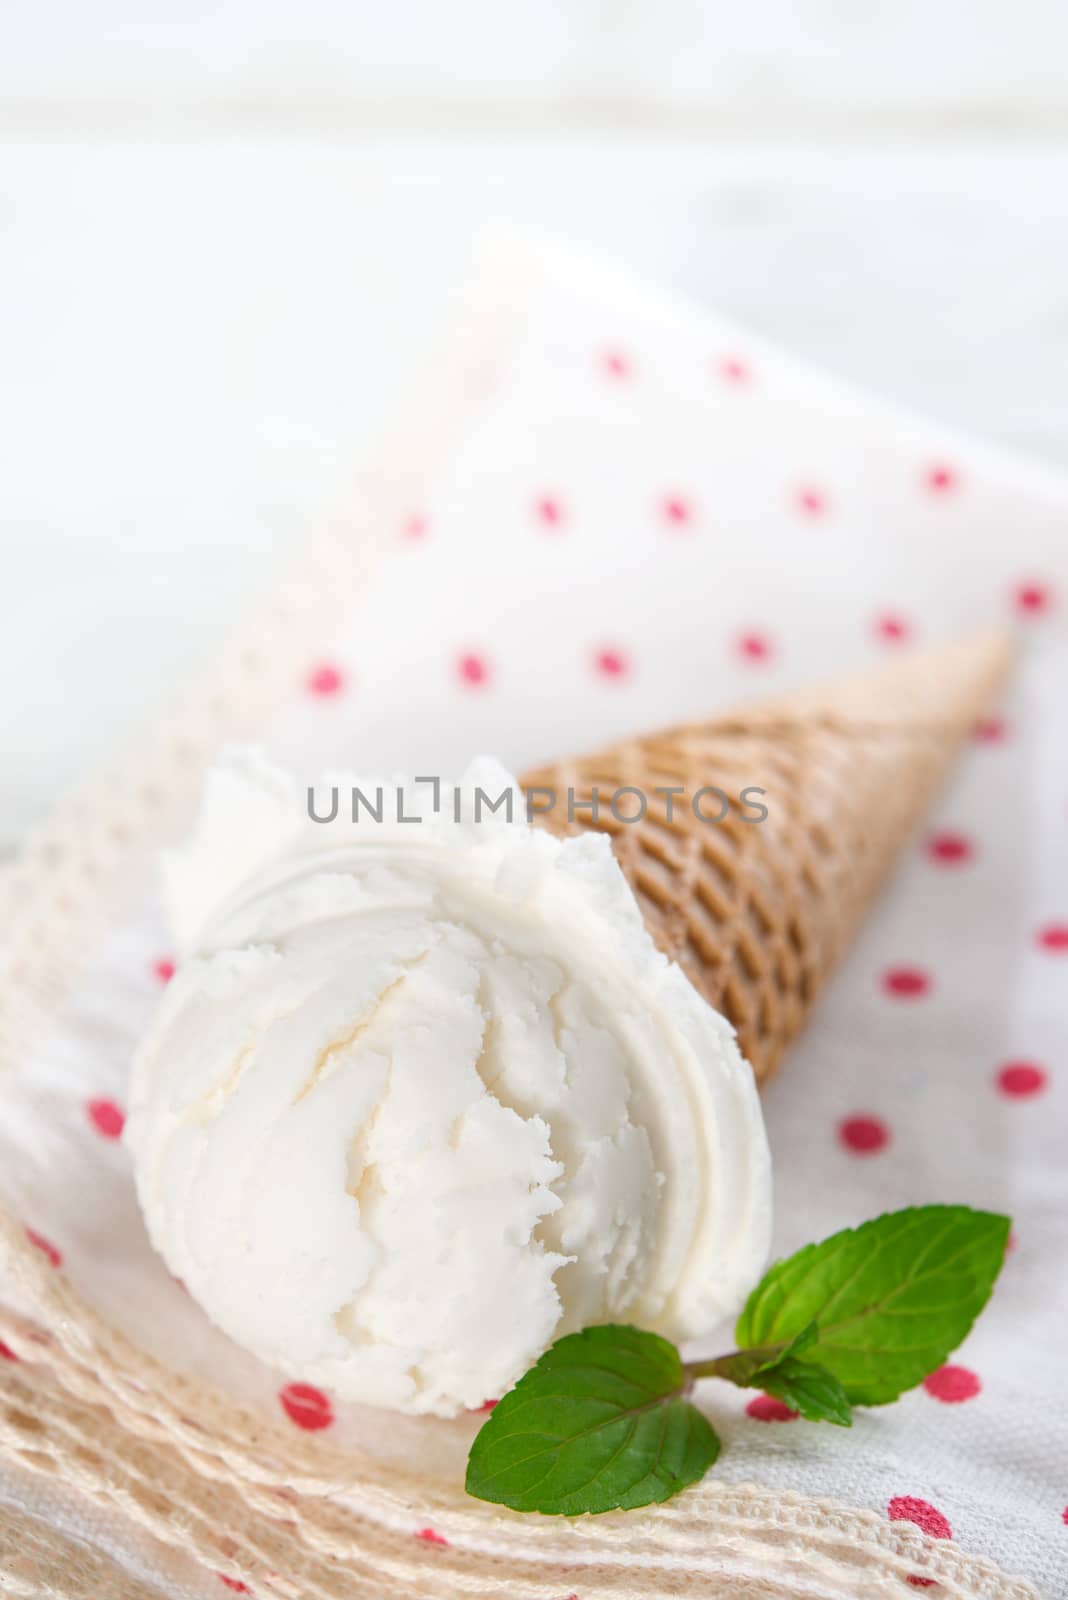 Scoop milk ice cream in waffle cone with mint on wood background.